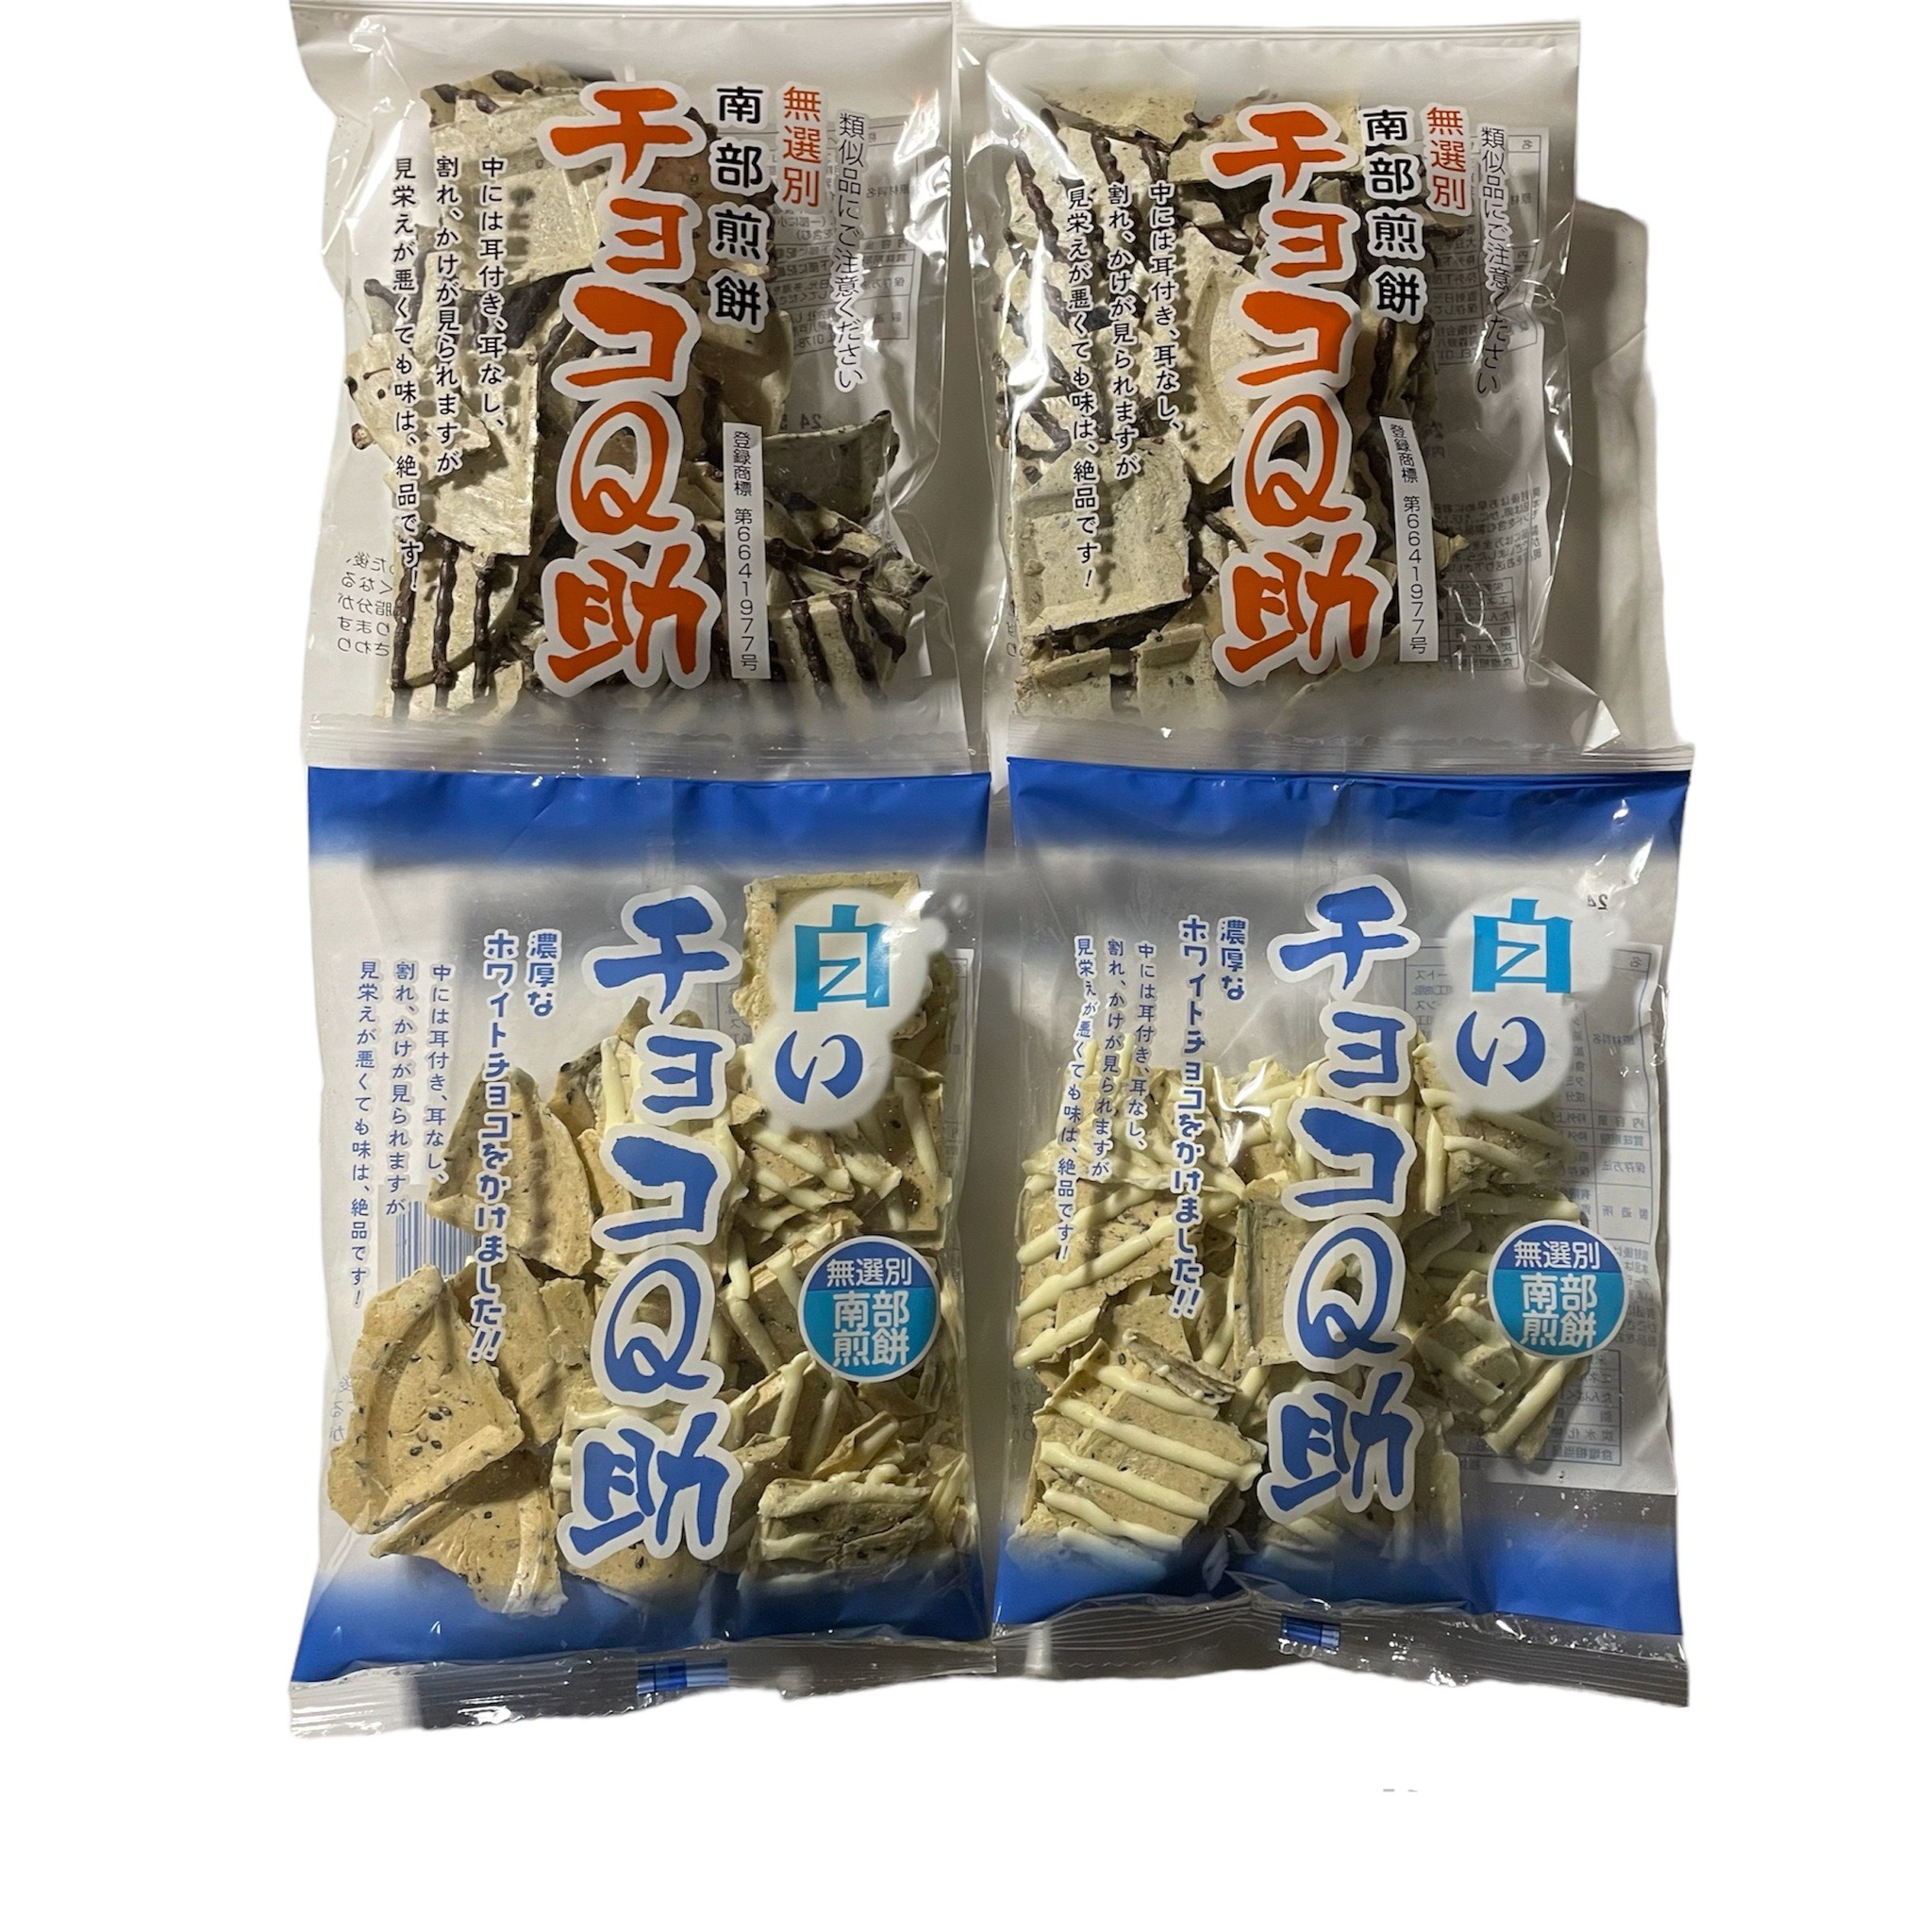  south part . mochi chocolate Q. white chocolate Q. meal . comparing 4 sack set chocolate south part rice cracker chocolate q Aomori . earth production 